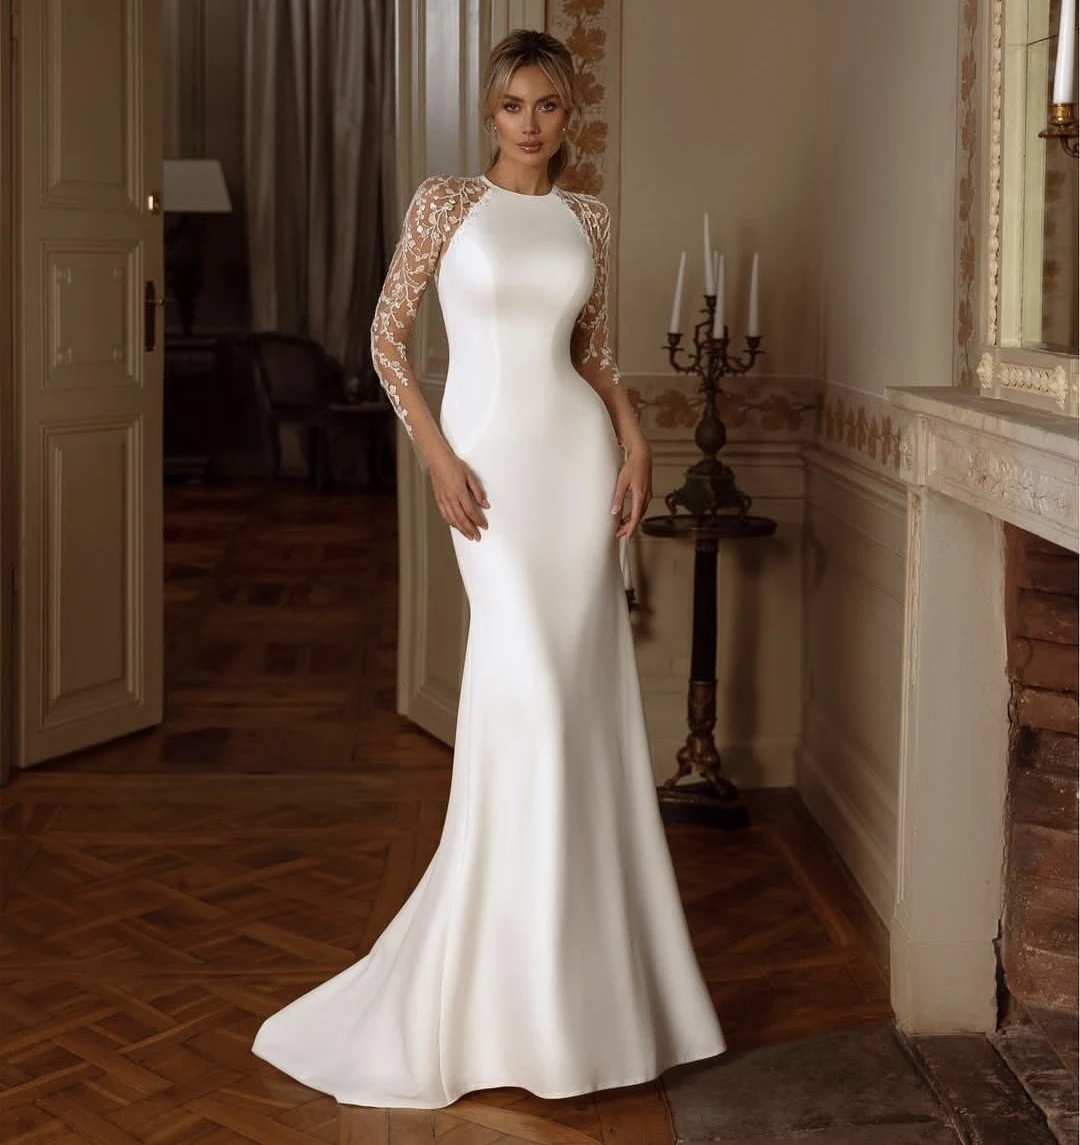 

Elegant Satin Wedding Dress Long Sleeve Lace Mermaid Lace Appliques Bridal Gown Customize To Measures Stunning Soft Stain Women